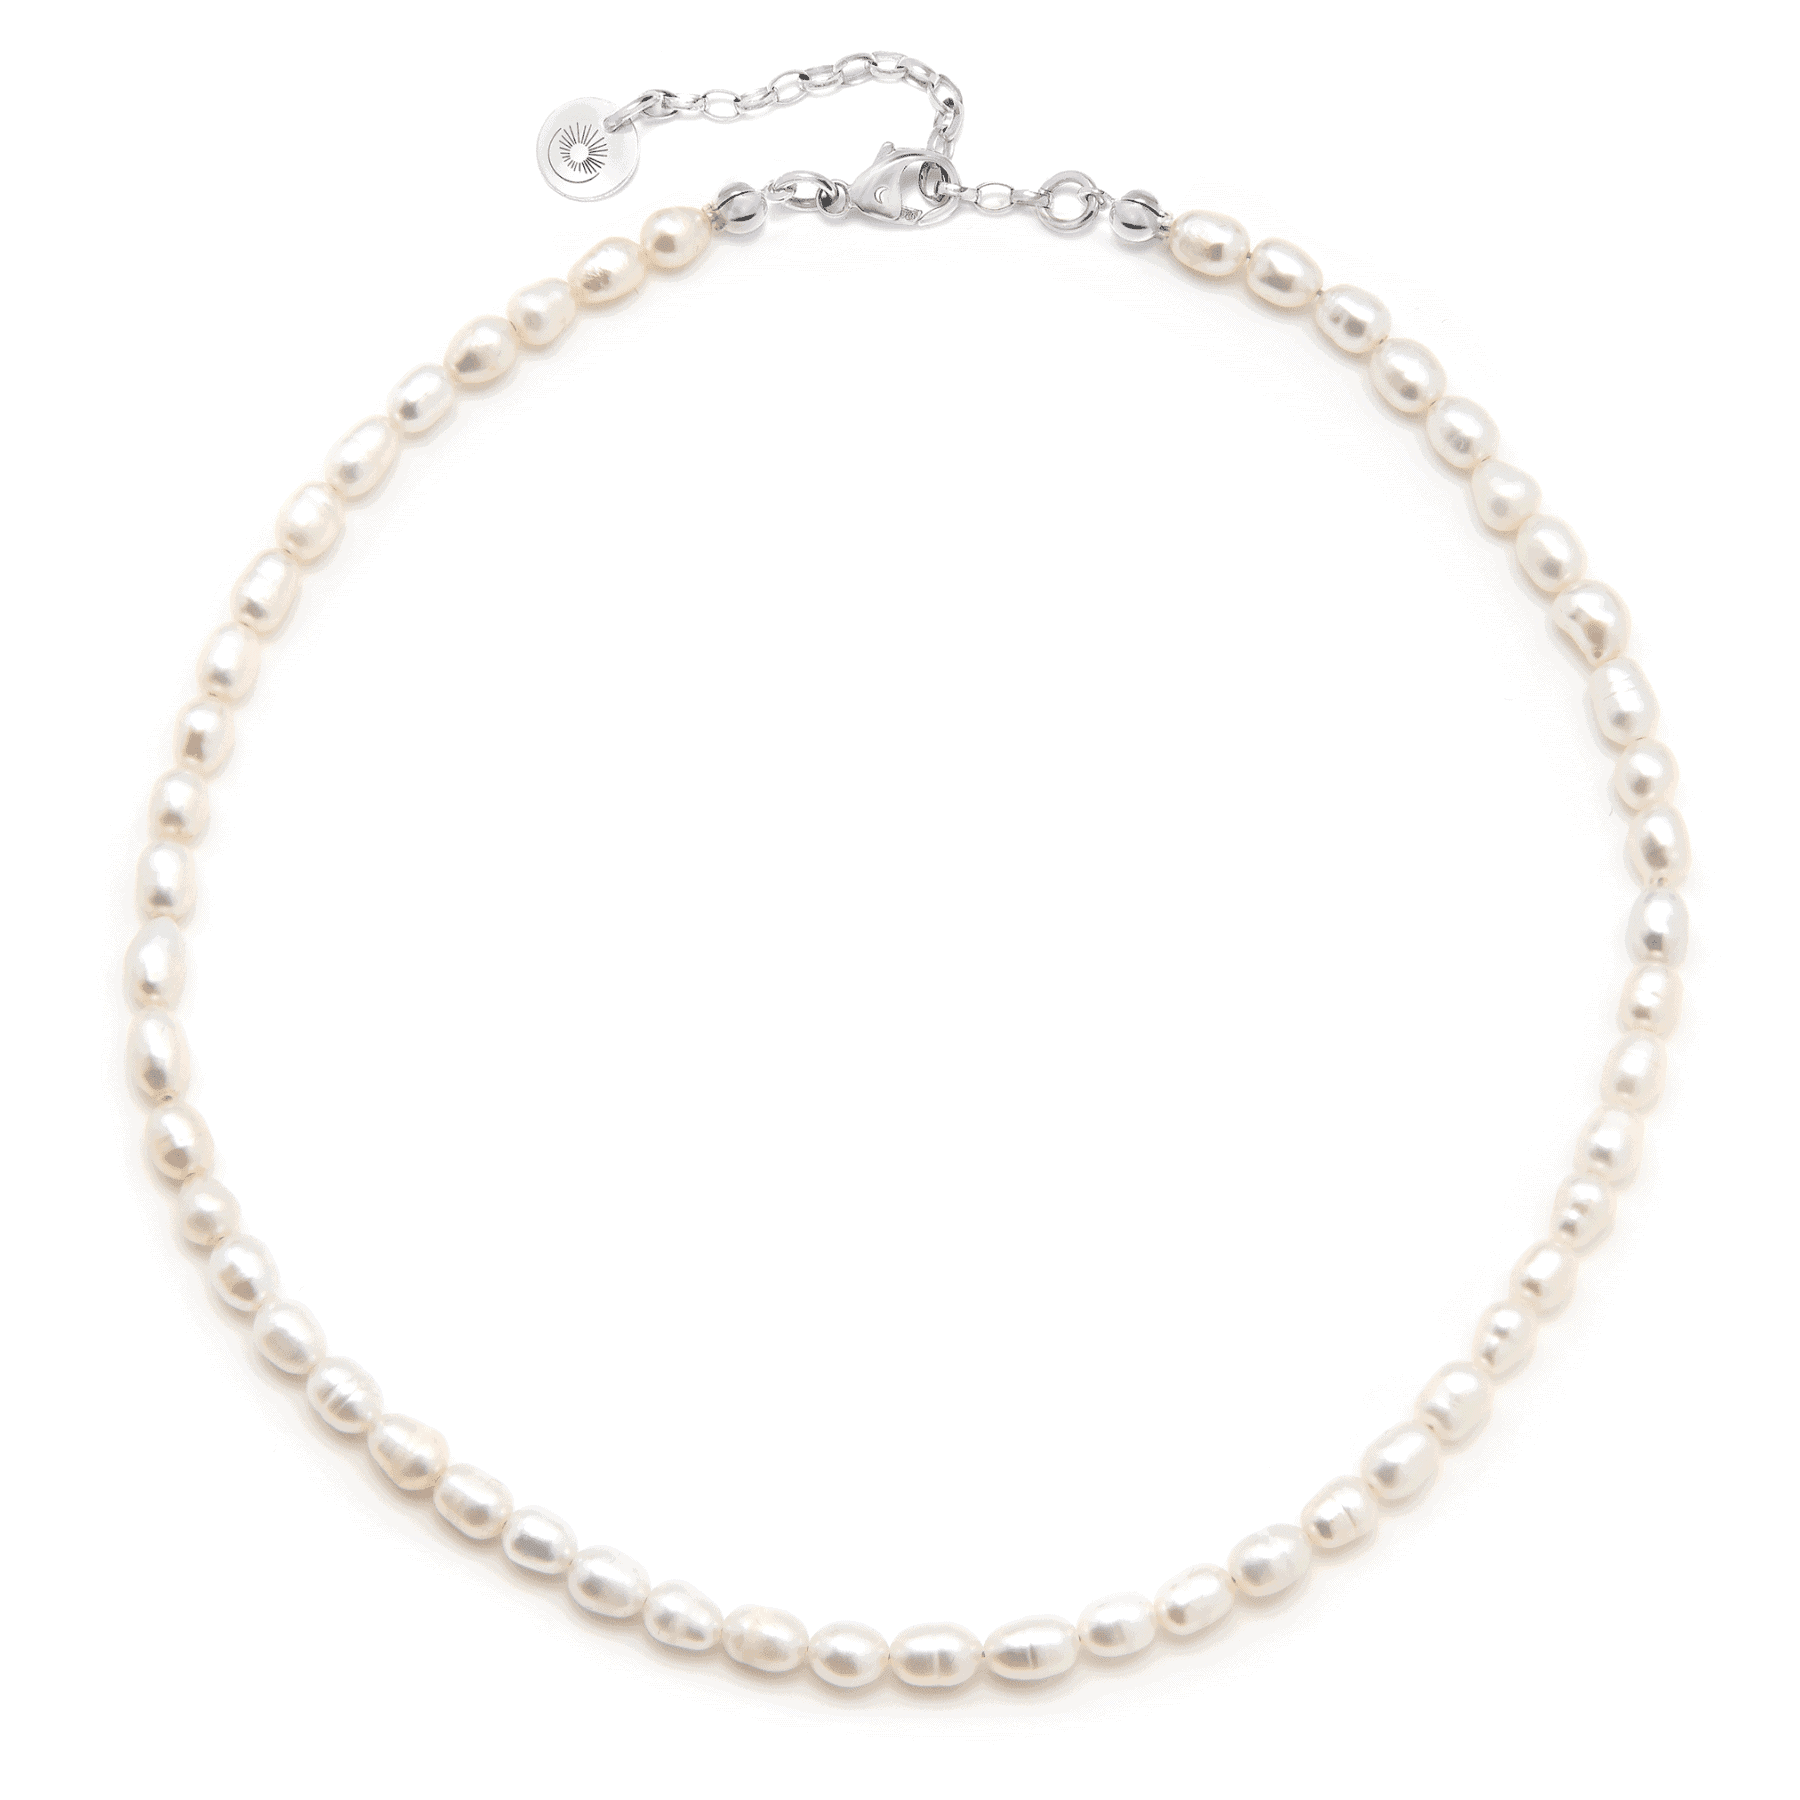 Pearl necklace choker with silver elements on white background